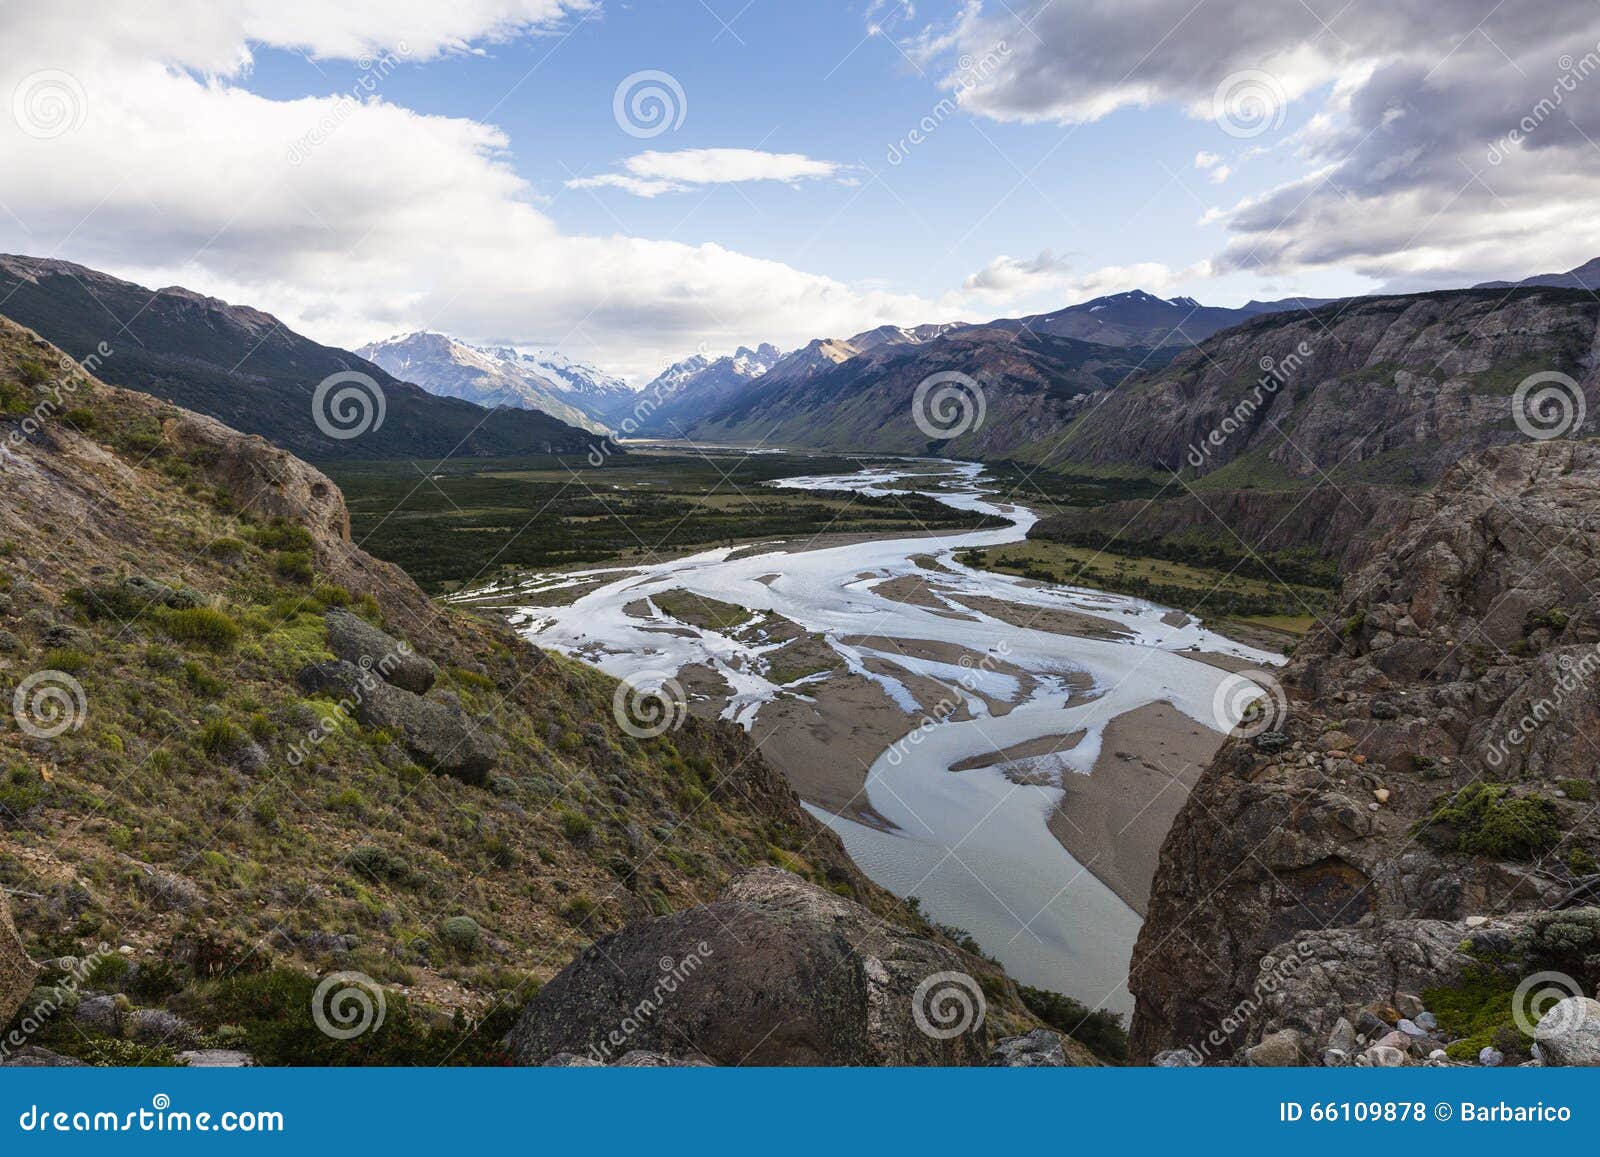 The Azul River Flowing through a Valley Stock Photo - Image of cloud ...